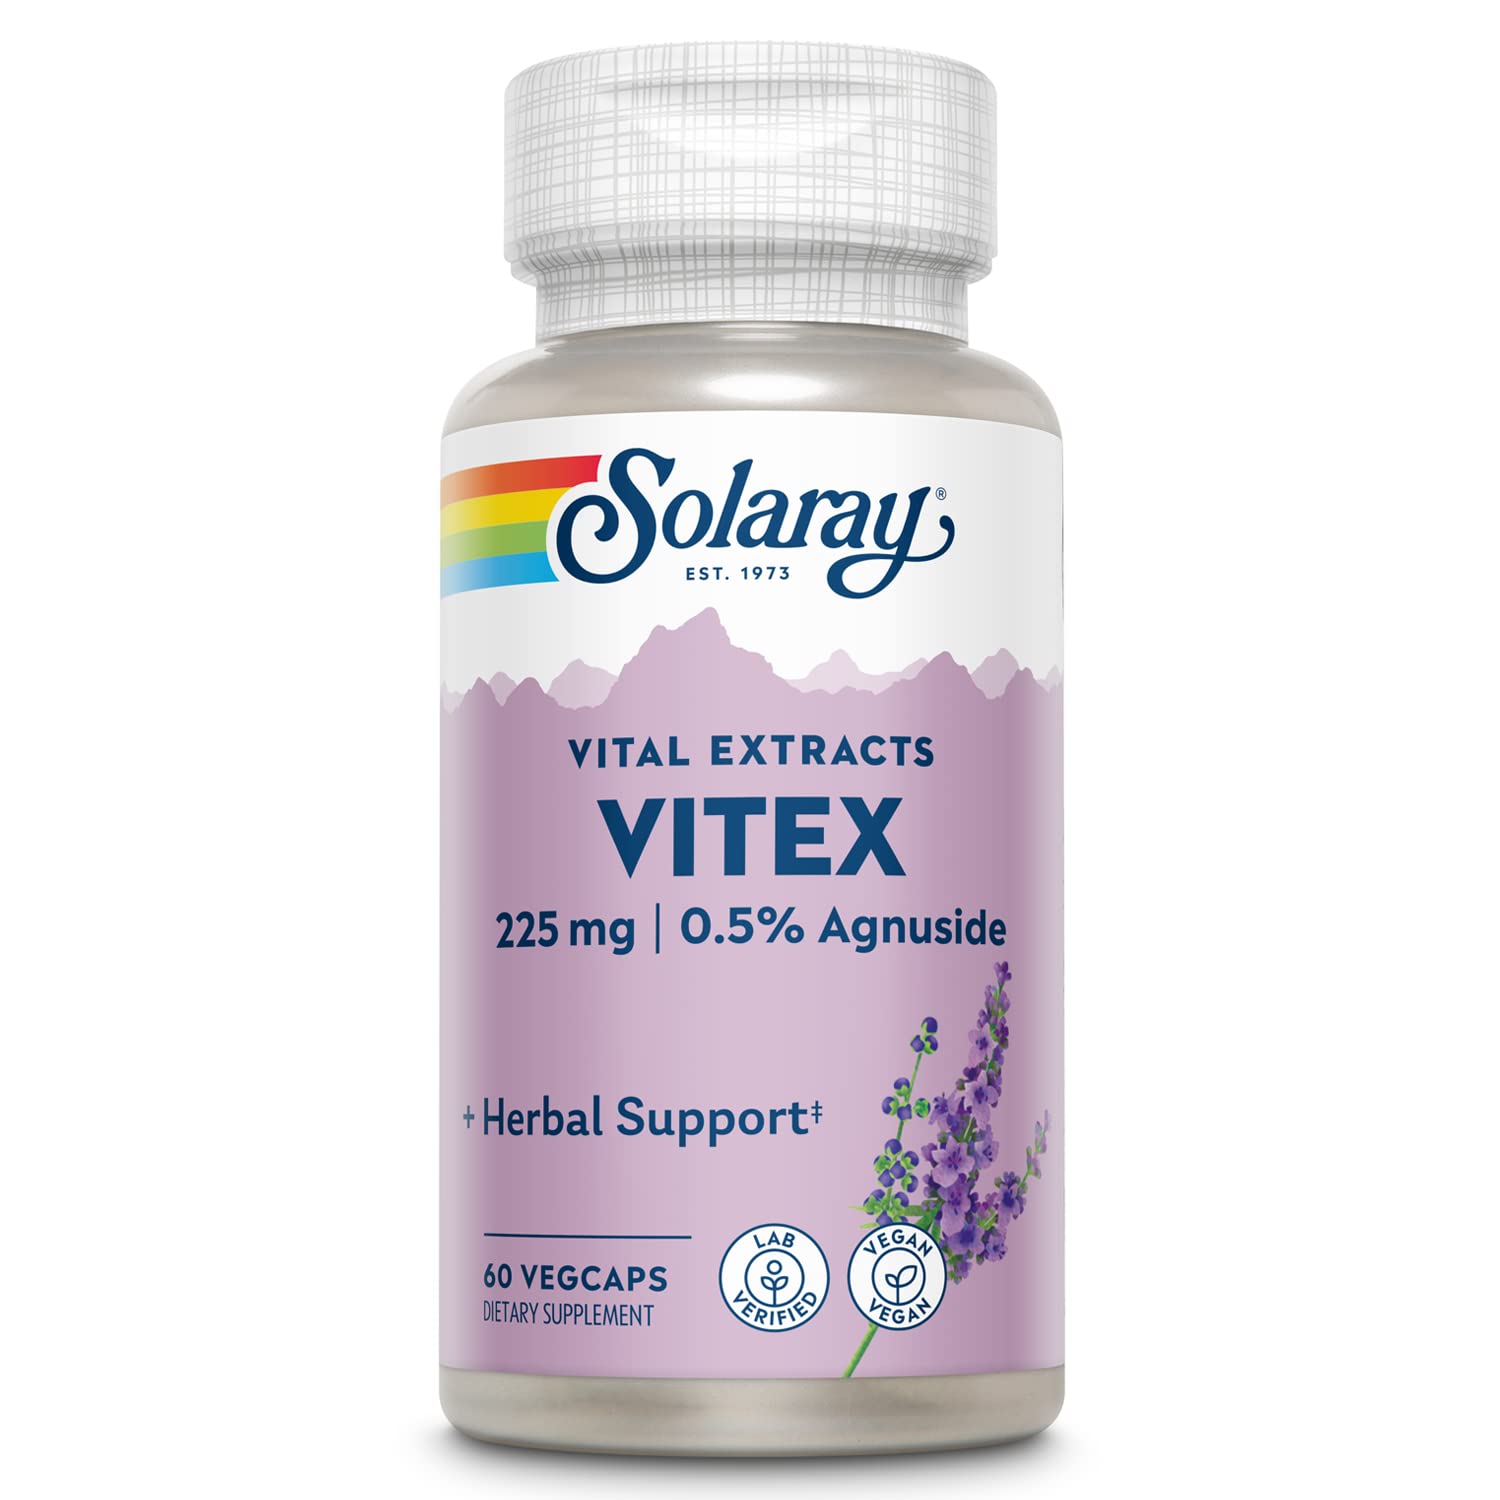 Solaray Vitex Chaste Berry Extract 225mg | Traditional Women's Health Support Supplement | Contains .5% Agnuside | Non-GMO | Vegan | 60 VegCaps